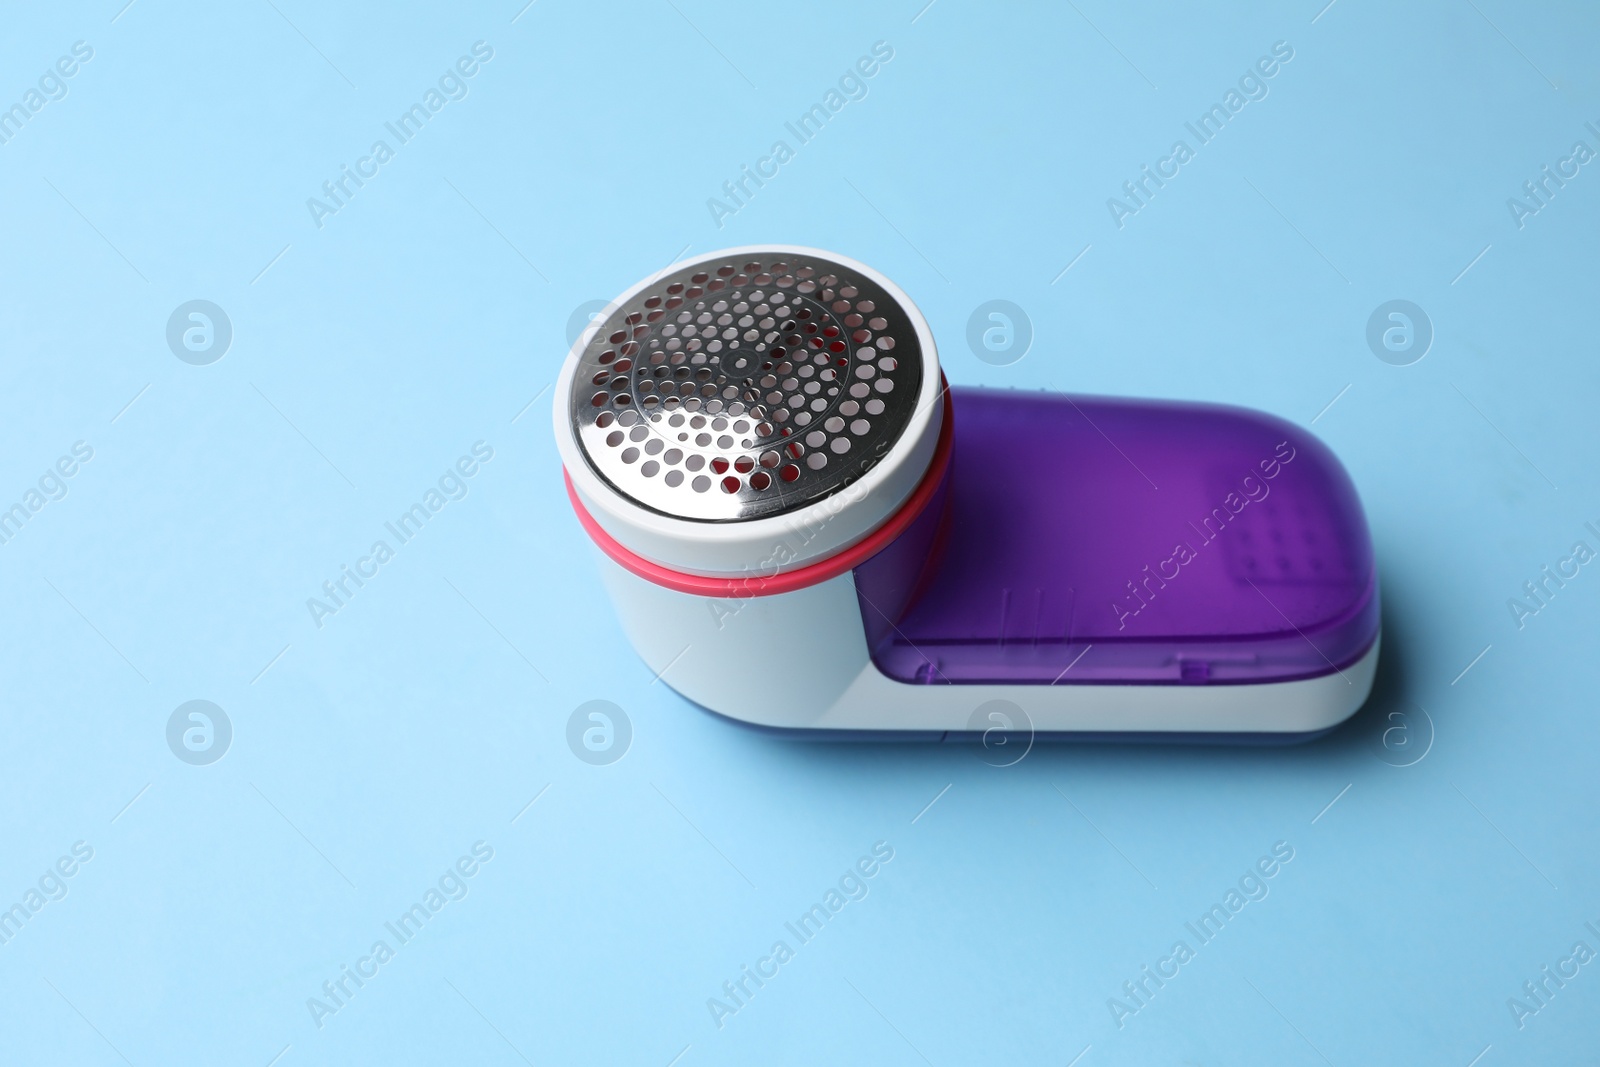 Photo of Modern fabric shaver on light blue background